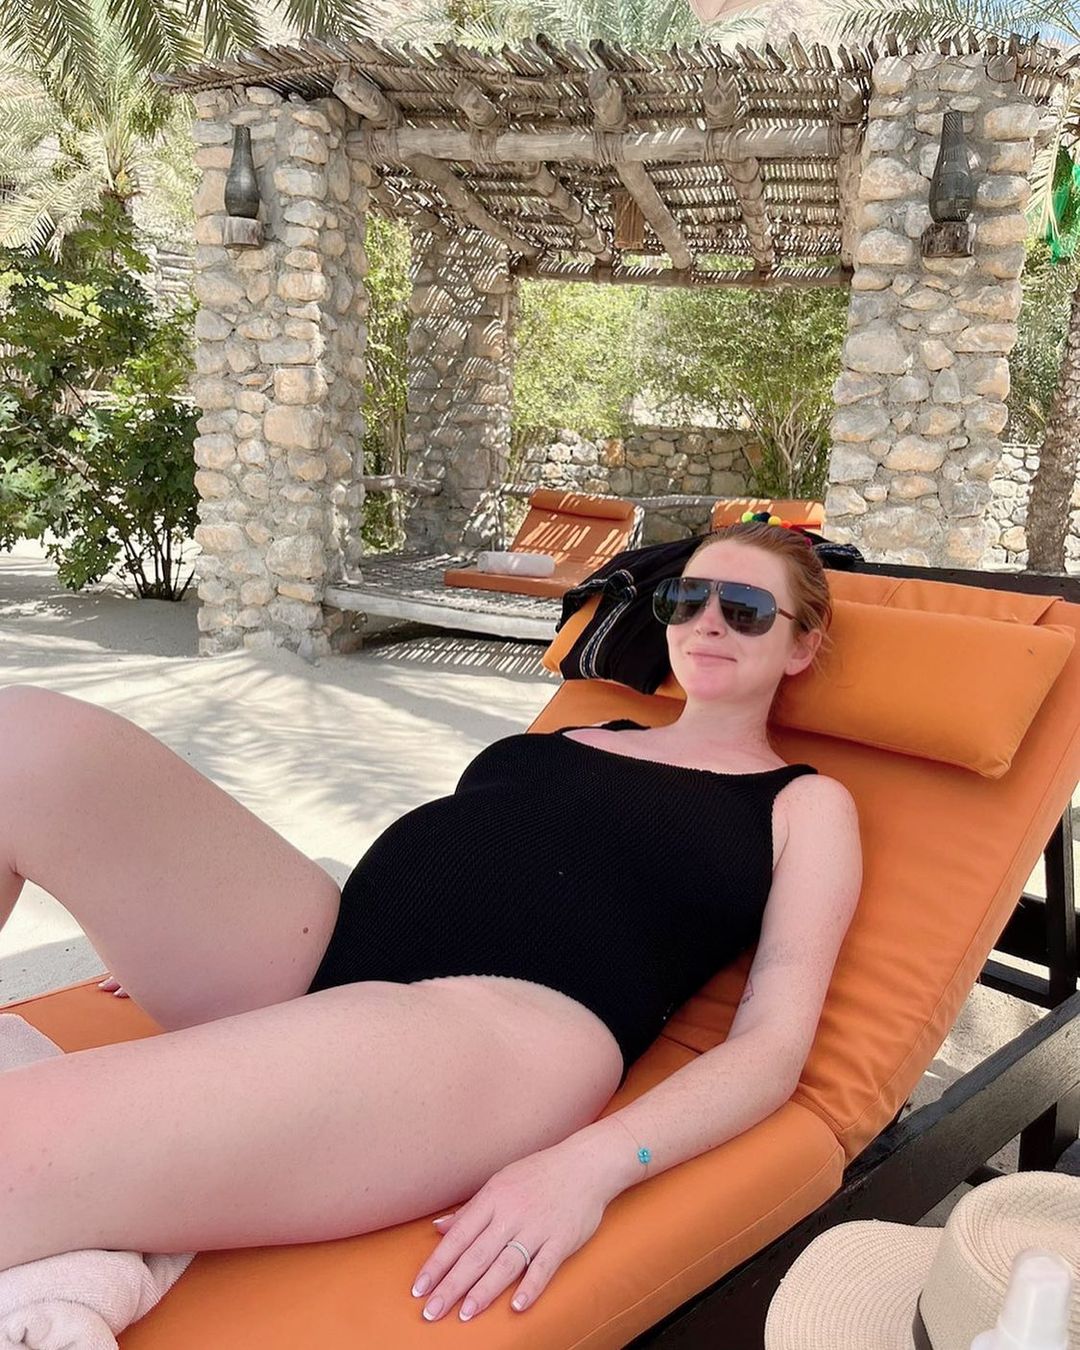 Photos n°1 : Lindsay Lohan Lays Back With Her Growing Bump!